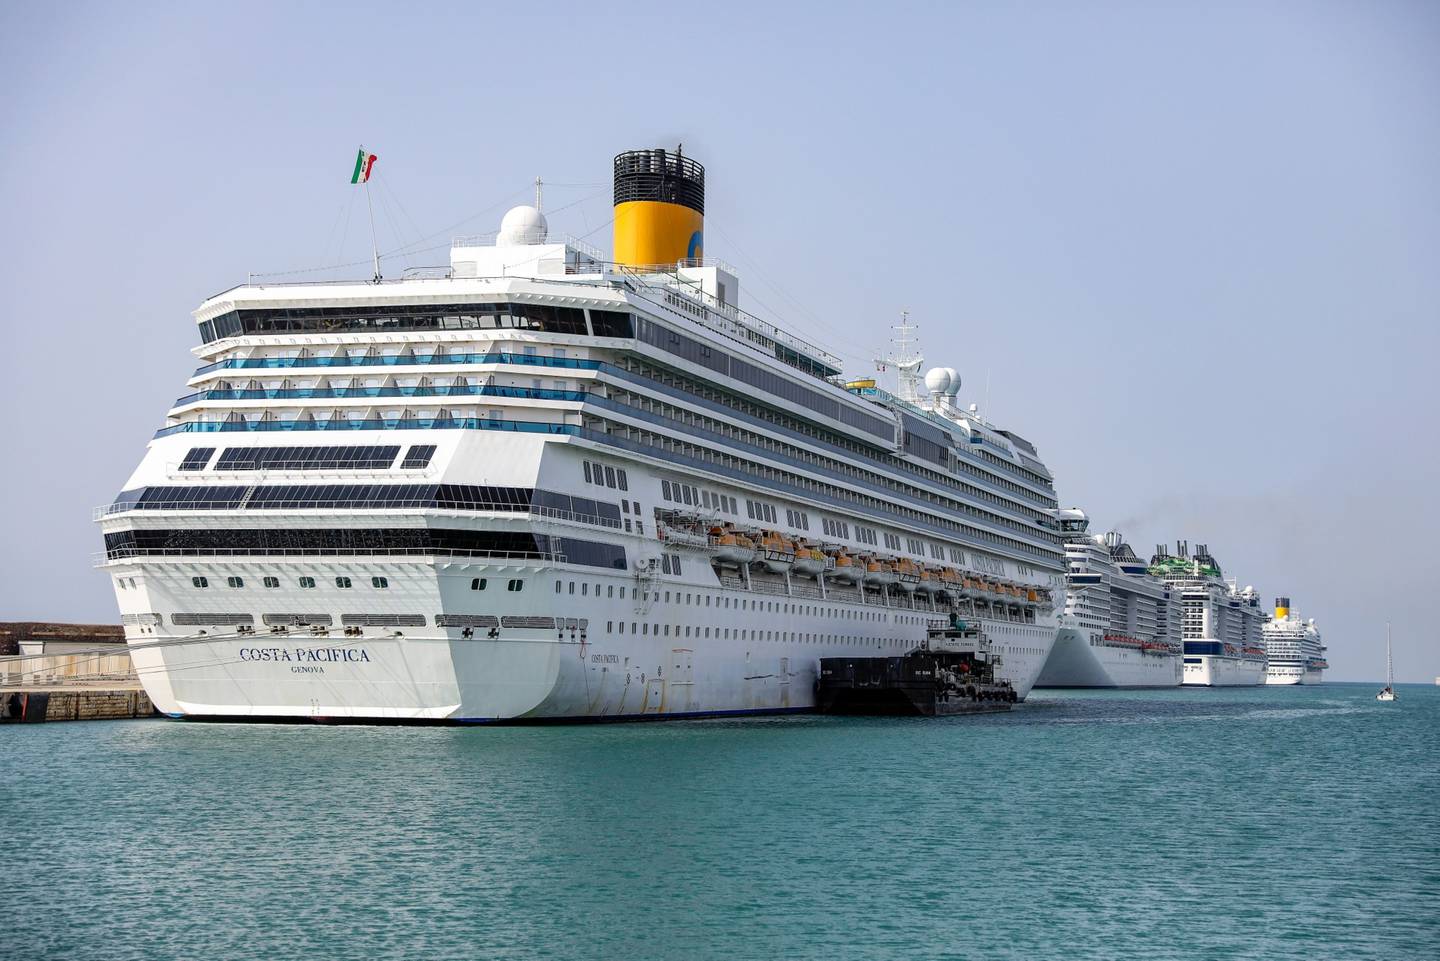 It's docked at the port of Civitavecchia near Rome, Italy, on Monday, Feb. 22, 2021.